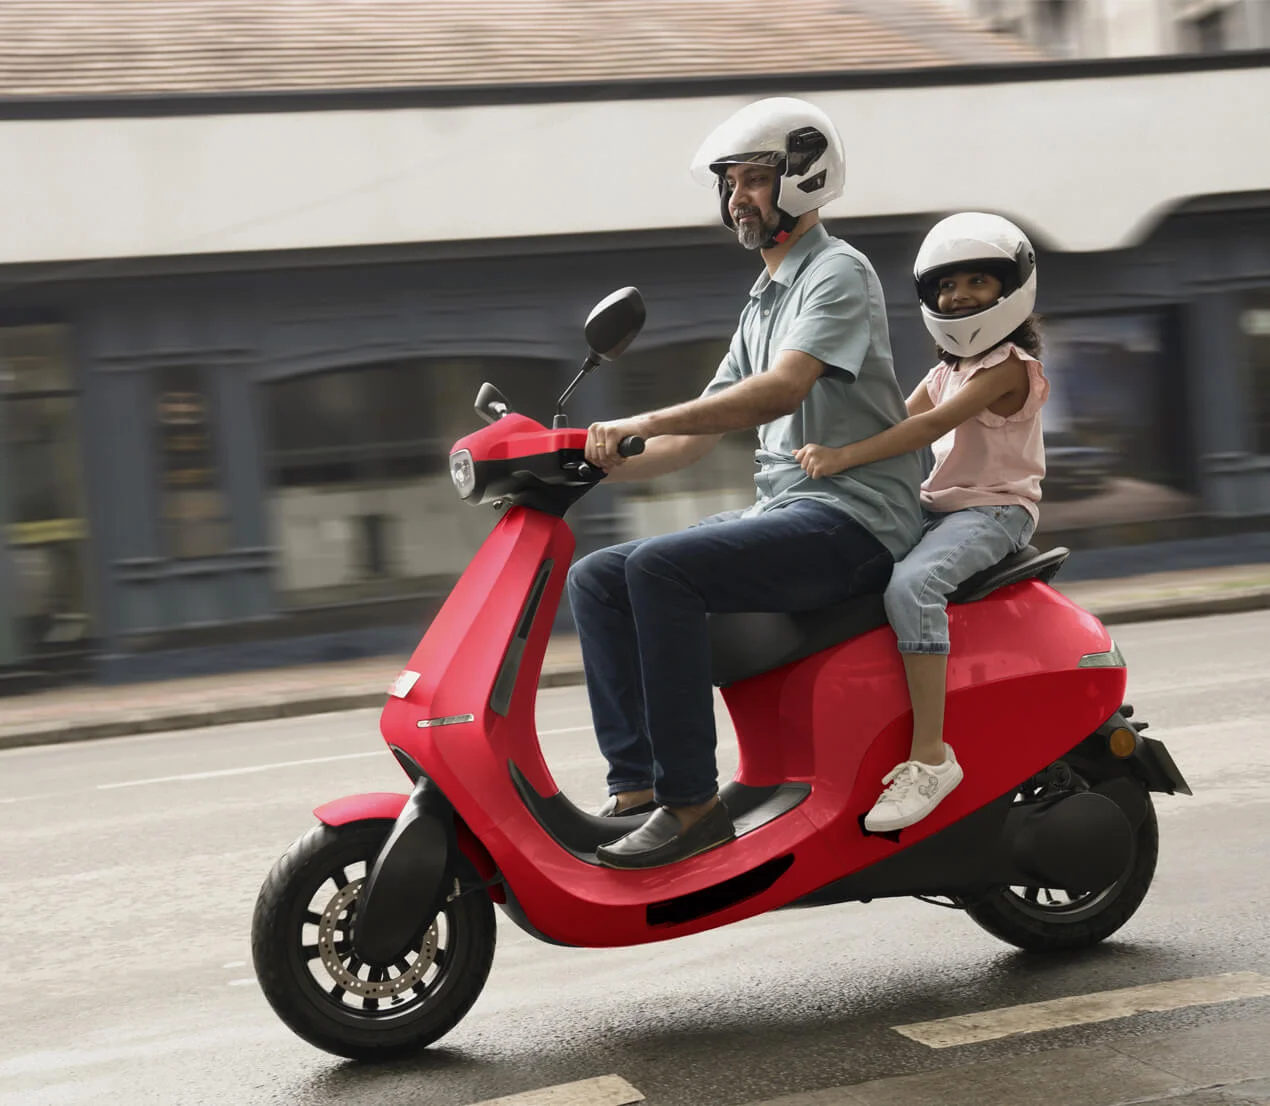 https://e-vehicleinfo.com/ola-electric-scooter-vs-ather-450x-price-range-features/